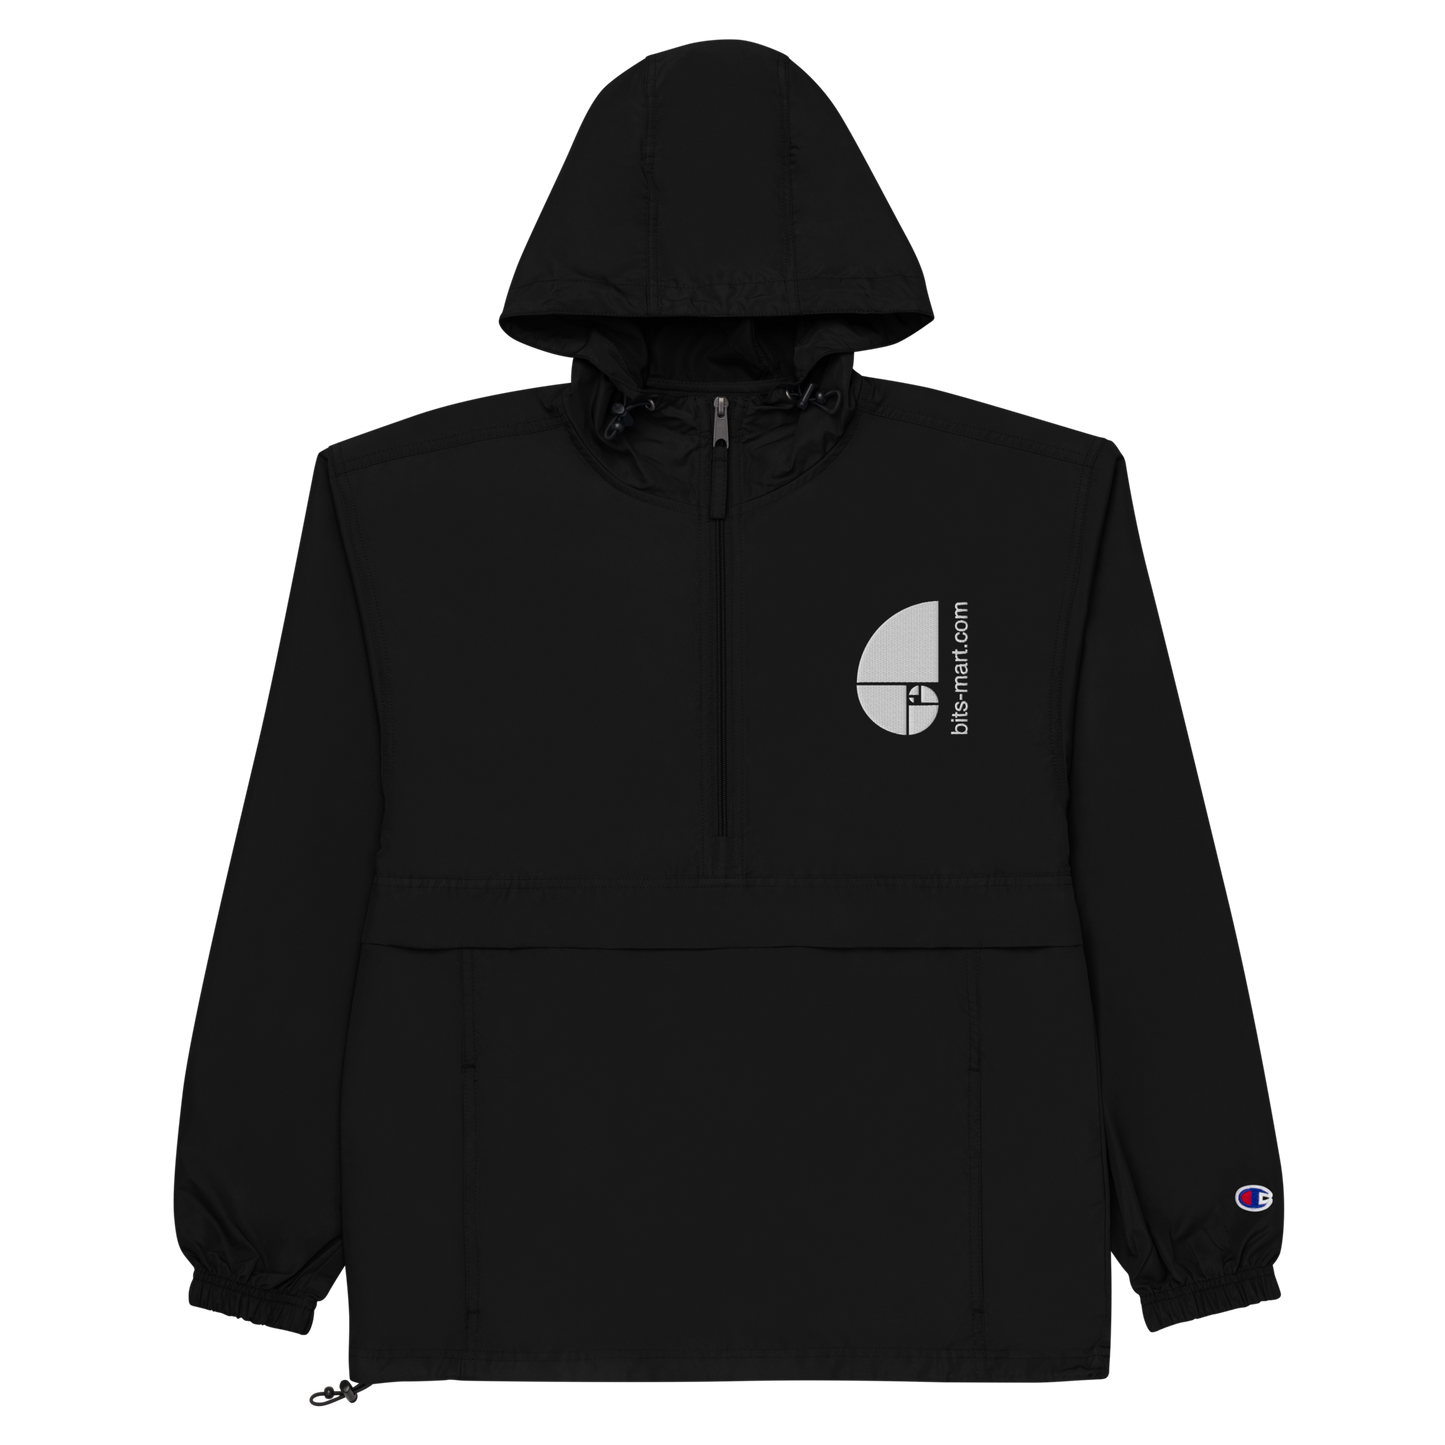 Embroidered Champion Packable Jacket — Black